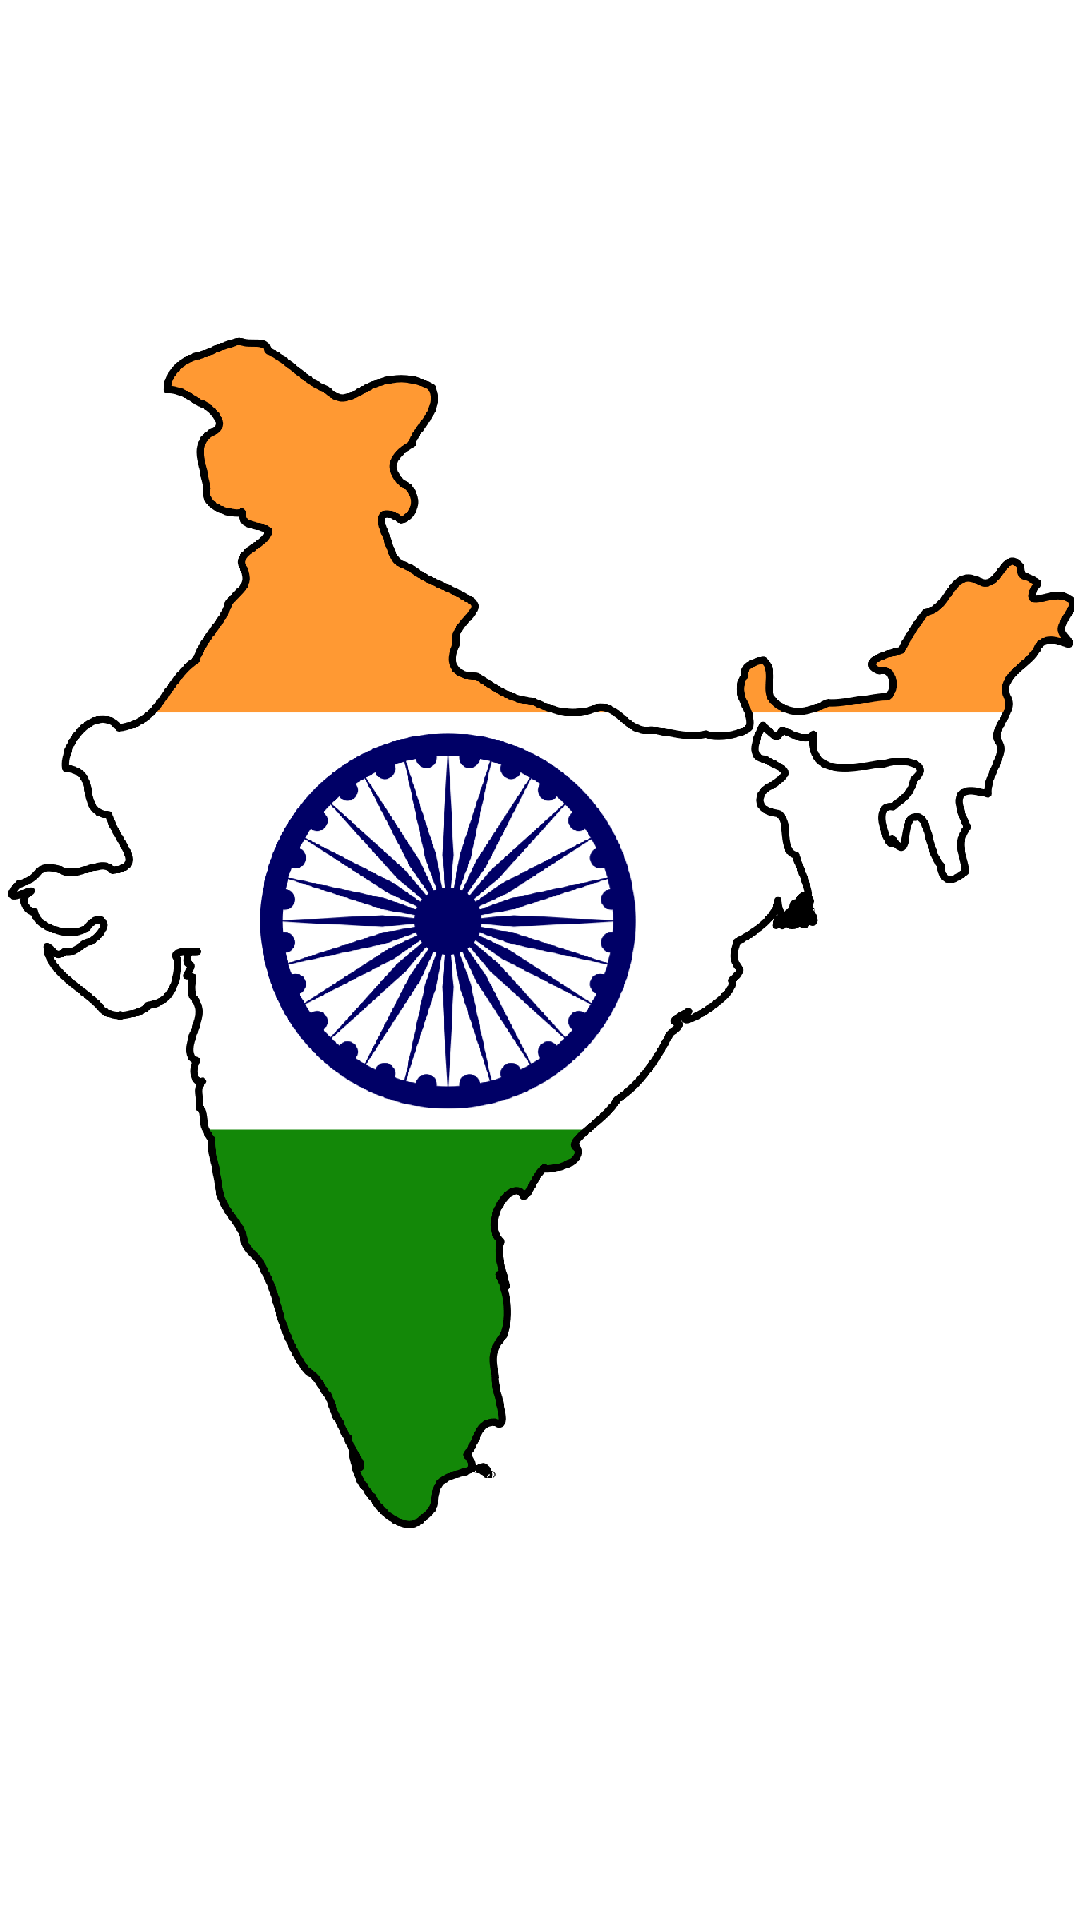 India Flag for Mobile Phone Wallpaper 04 of 17 Map and Flag